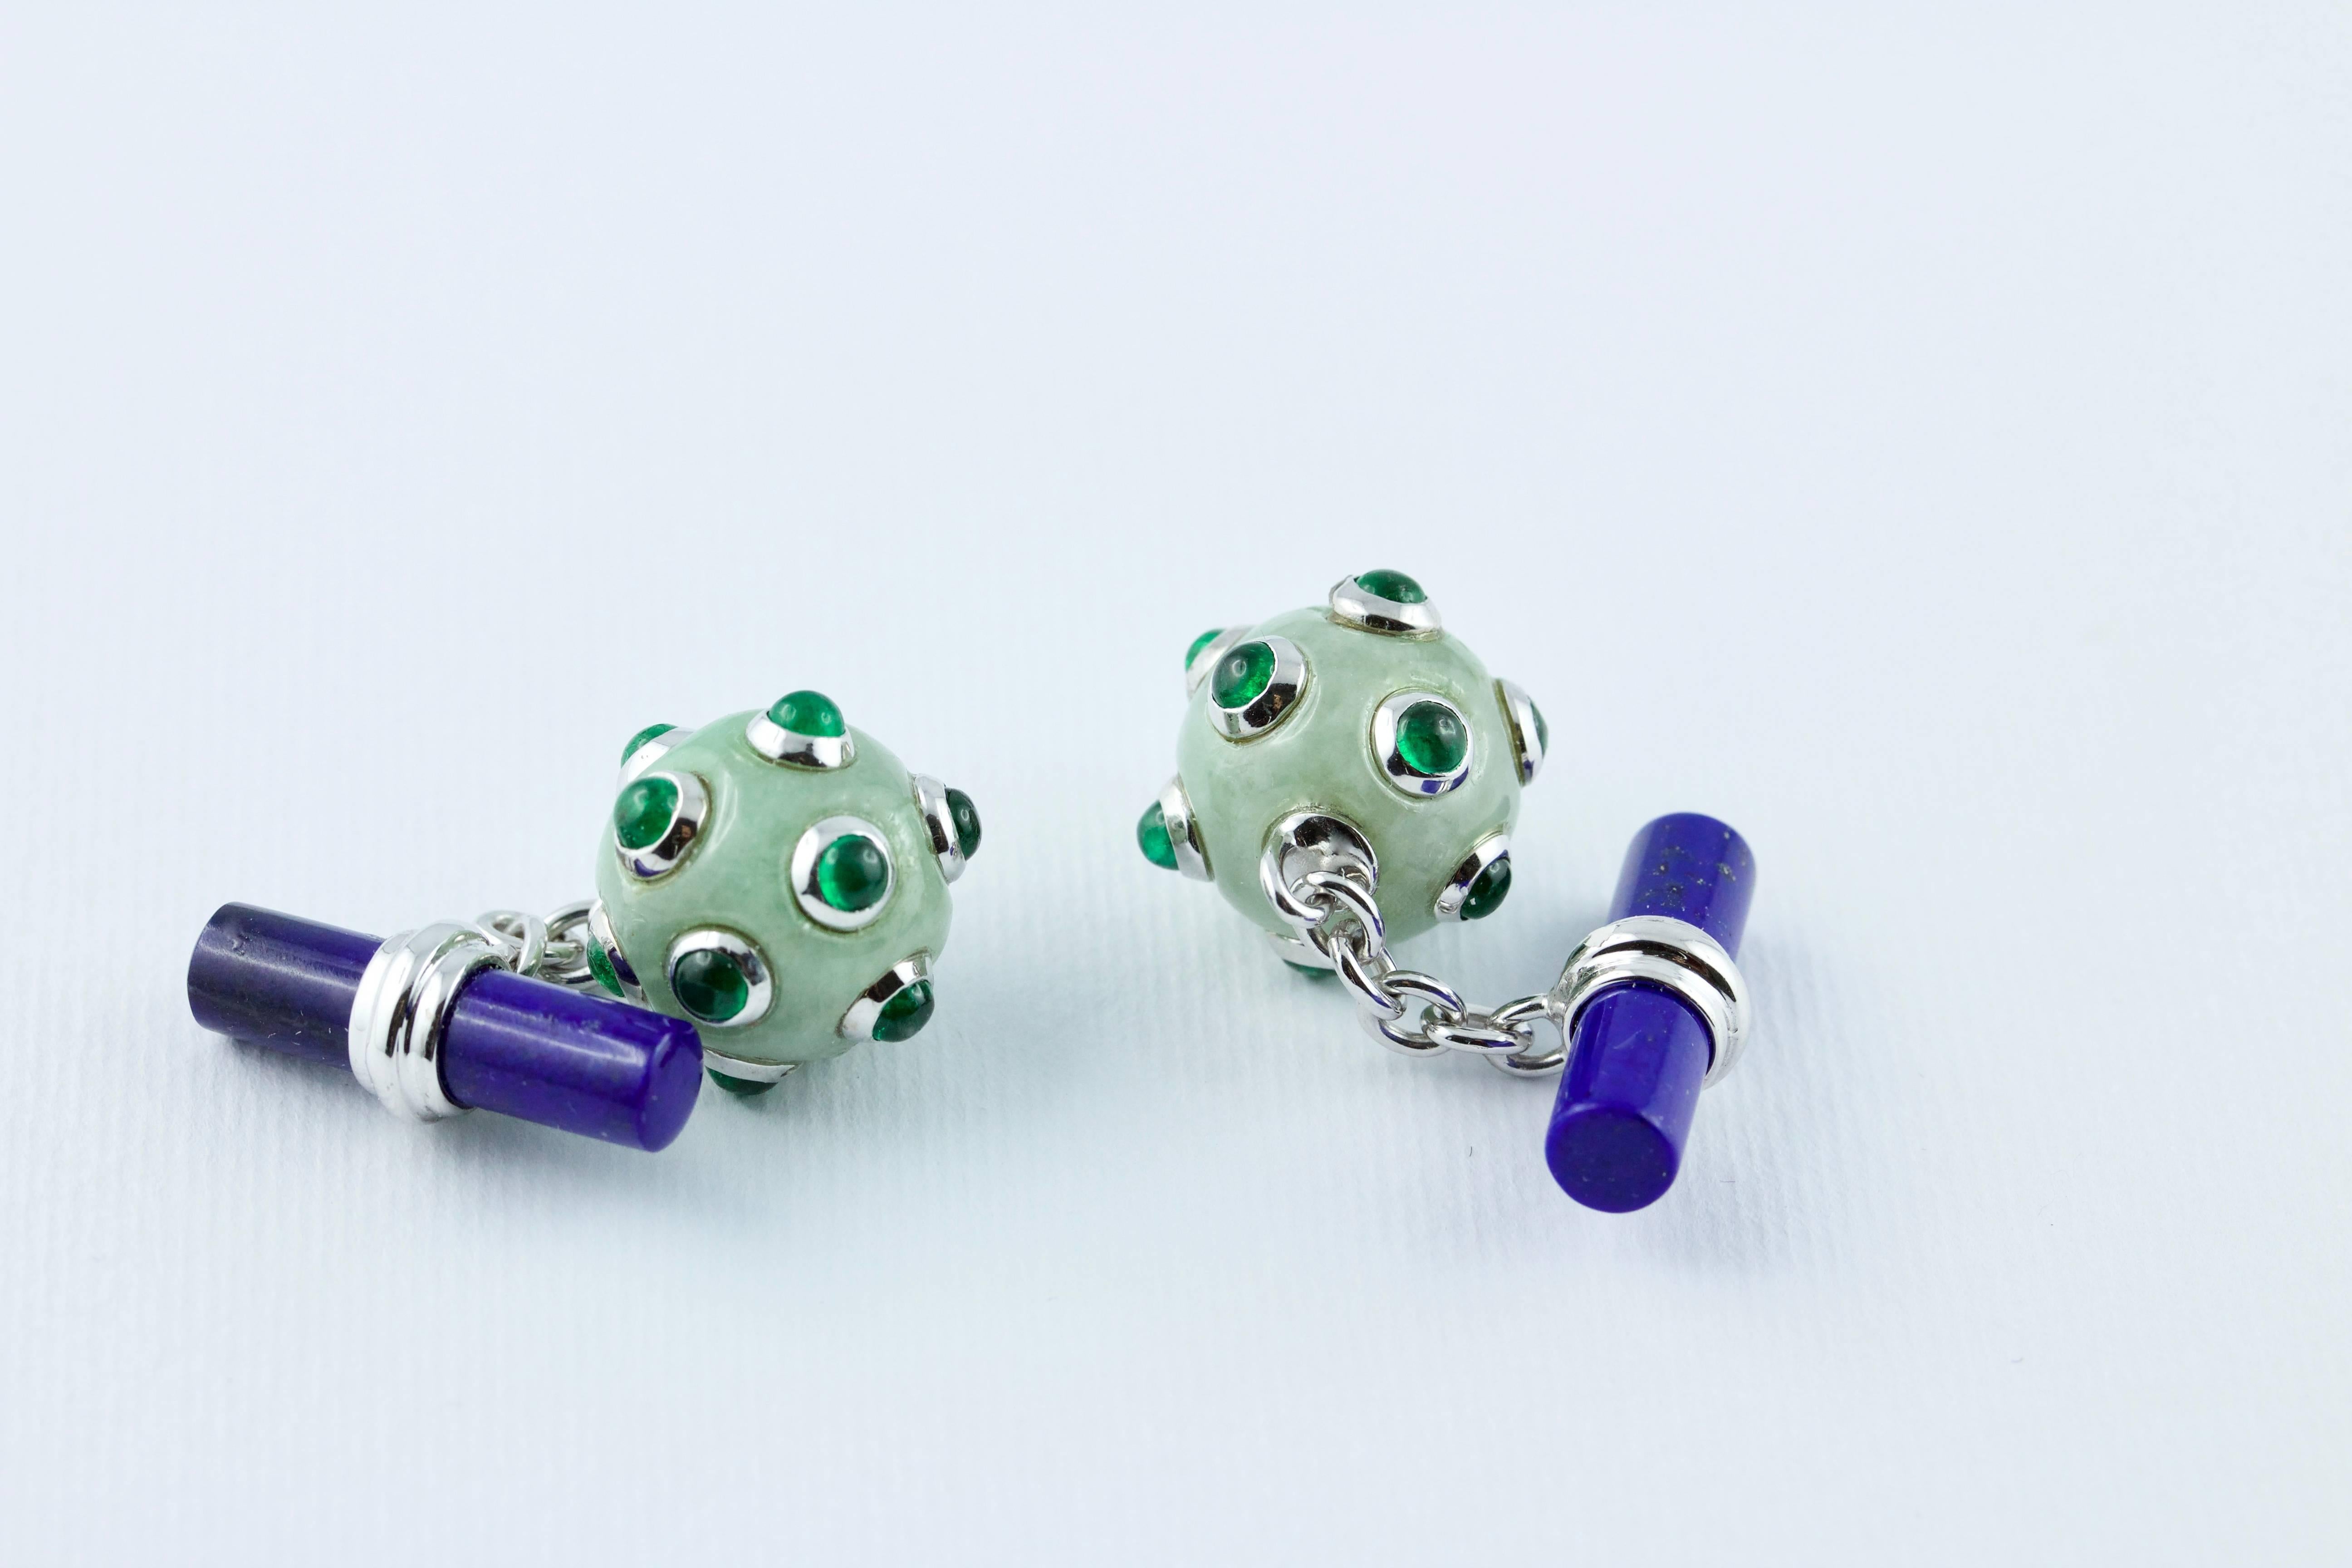 This striking pair of cufflinks features a spherical front face made of jade with cabochon emeralds (for a total of 22 cabochons) mounted on 18 karat white gold that create a unique texture evoking the shape of submarine mines.
Made in gold is also